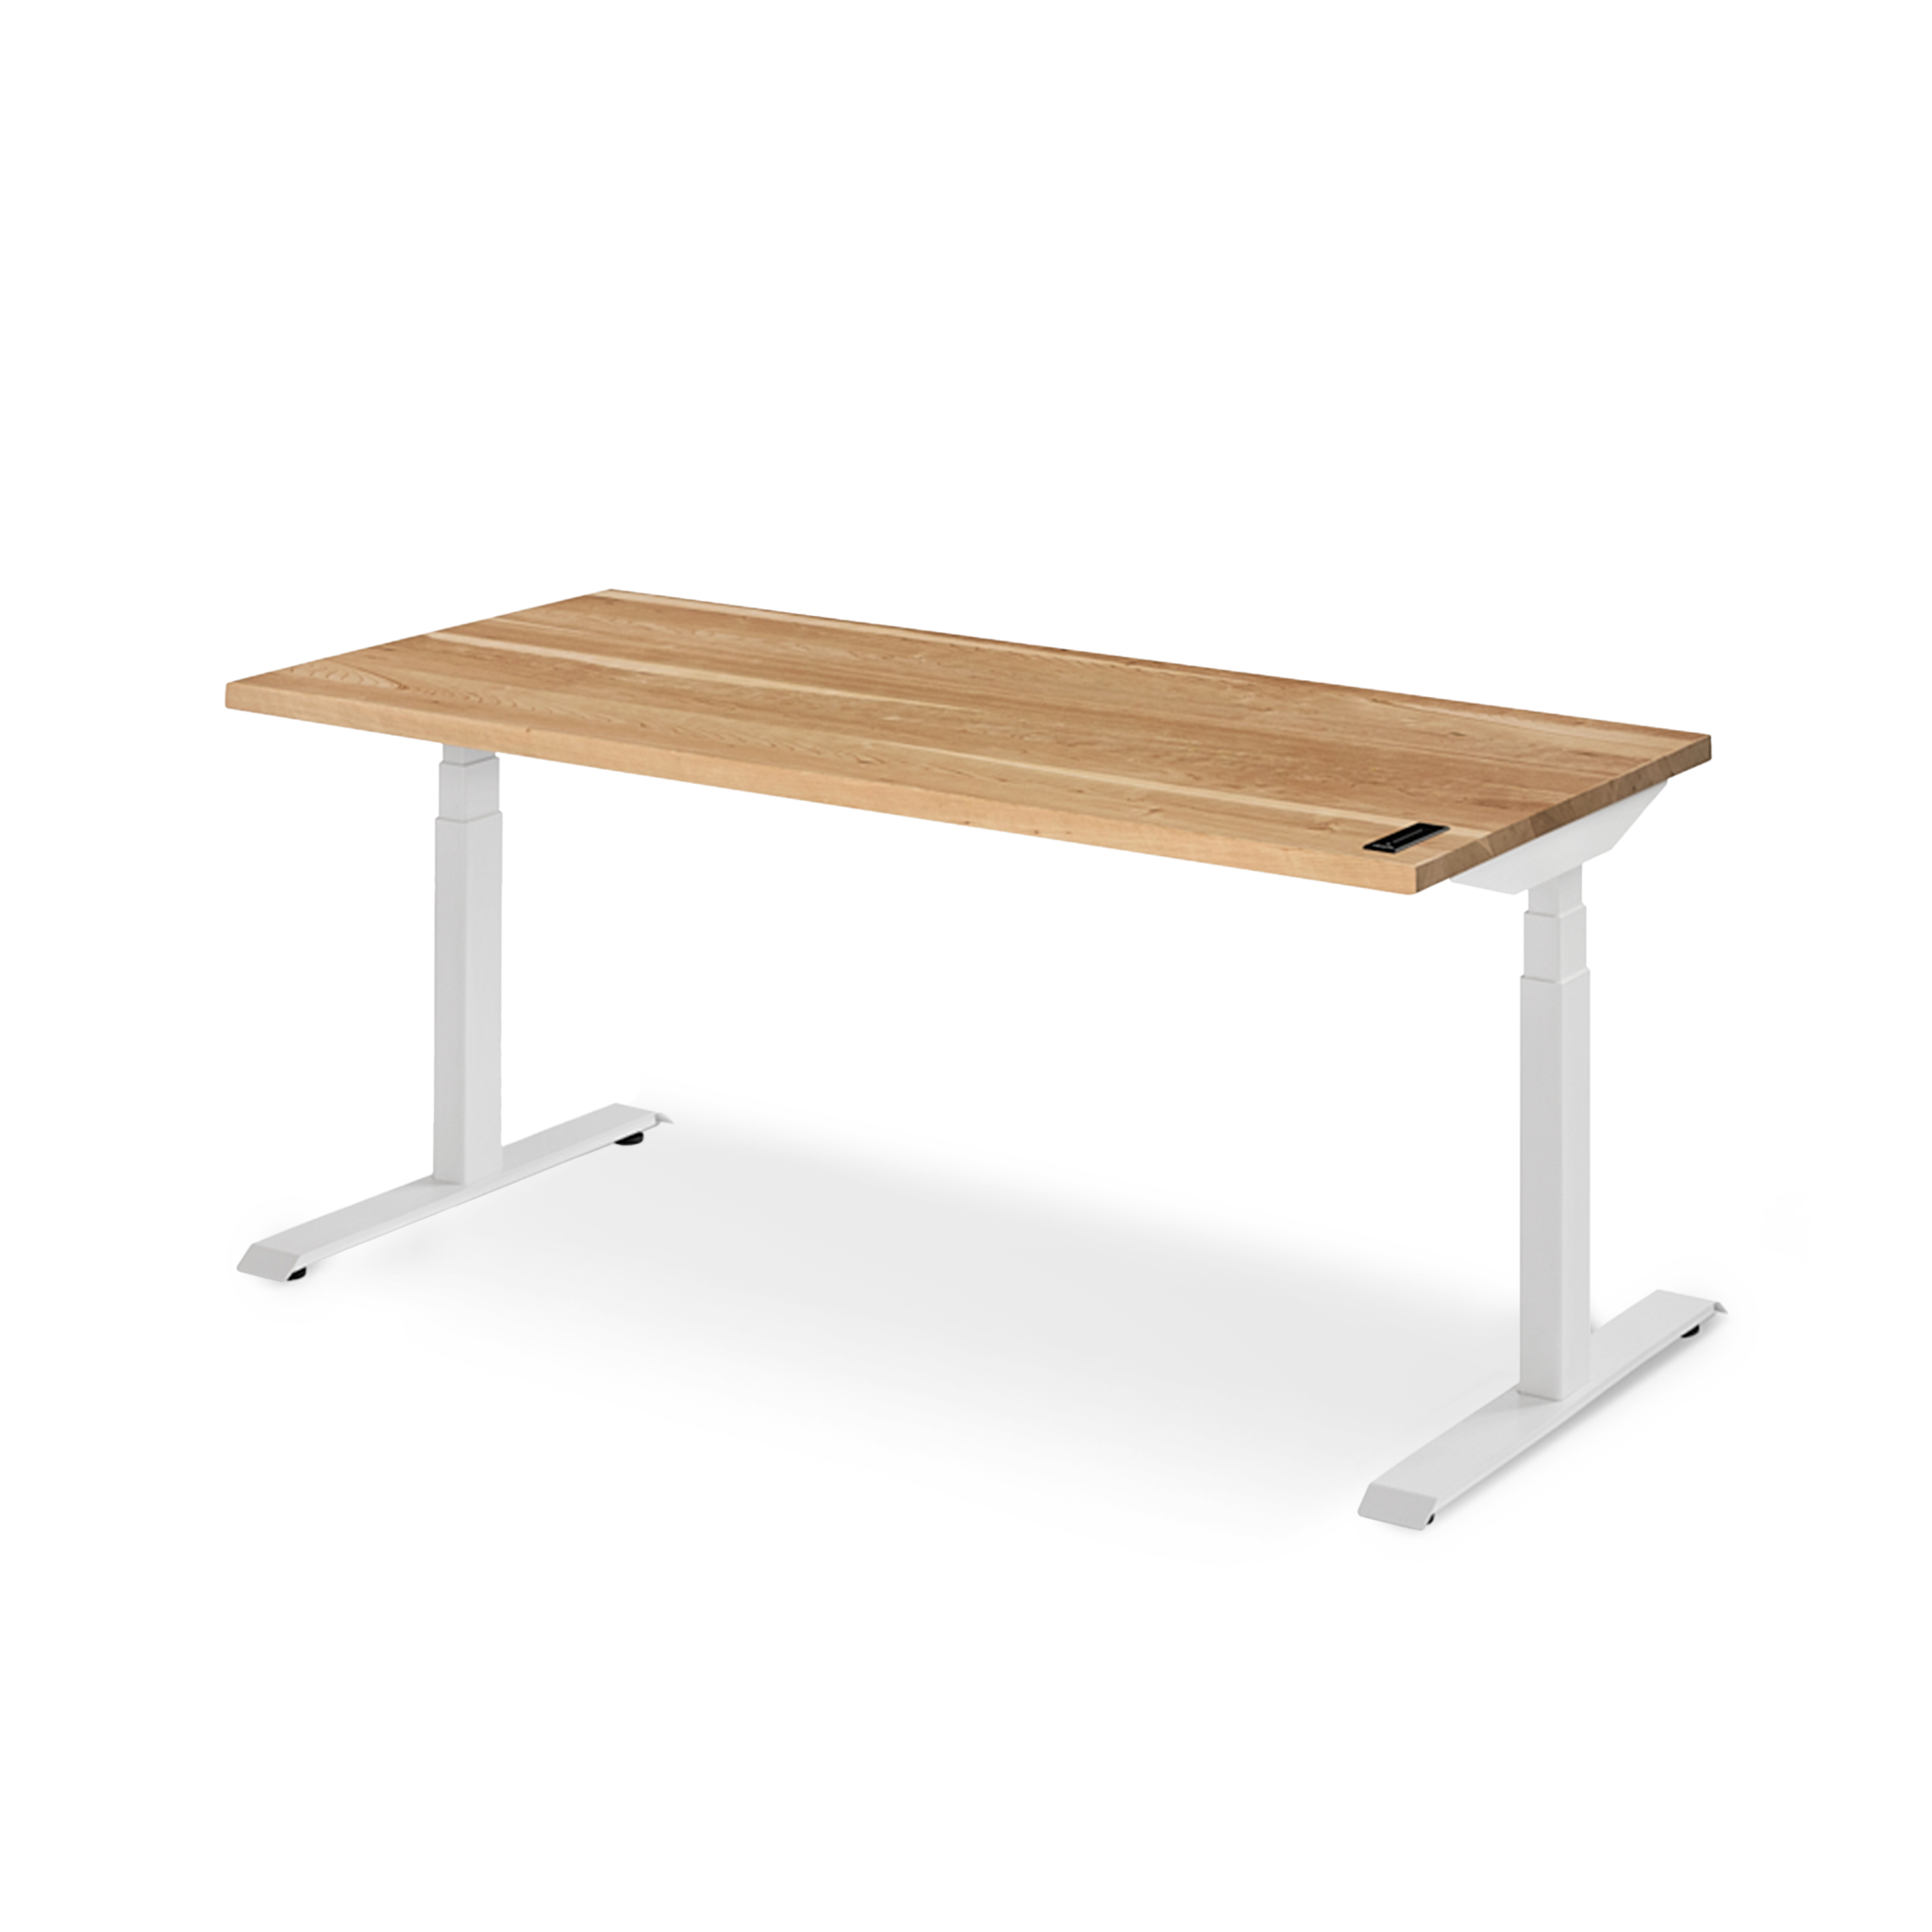 Almost Perfect Sway Desk - Cherrywood__White - Cerisier__Blanc